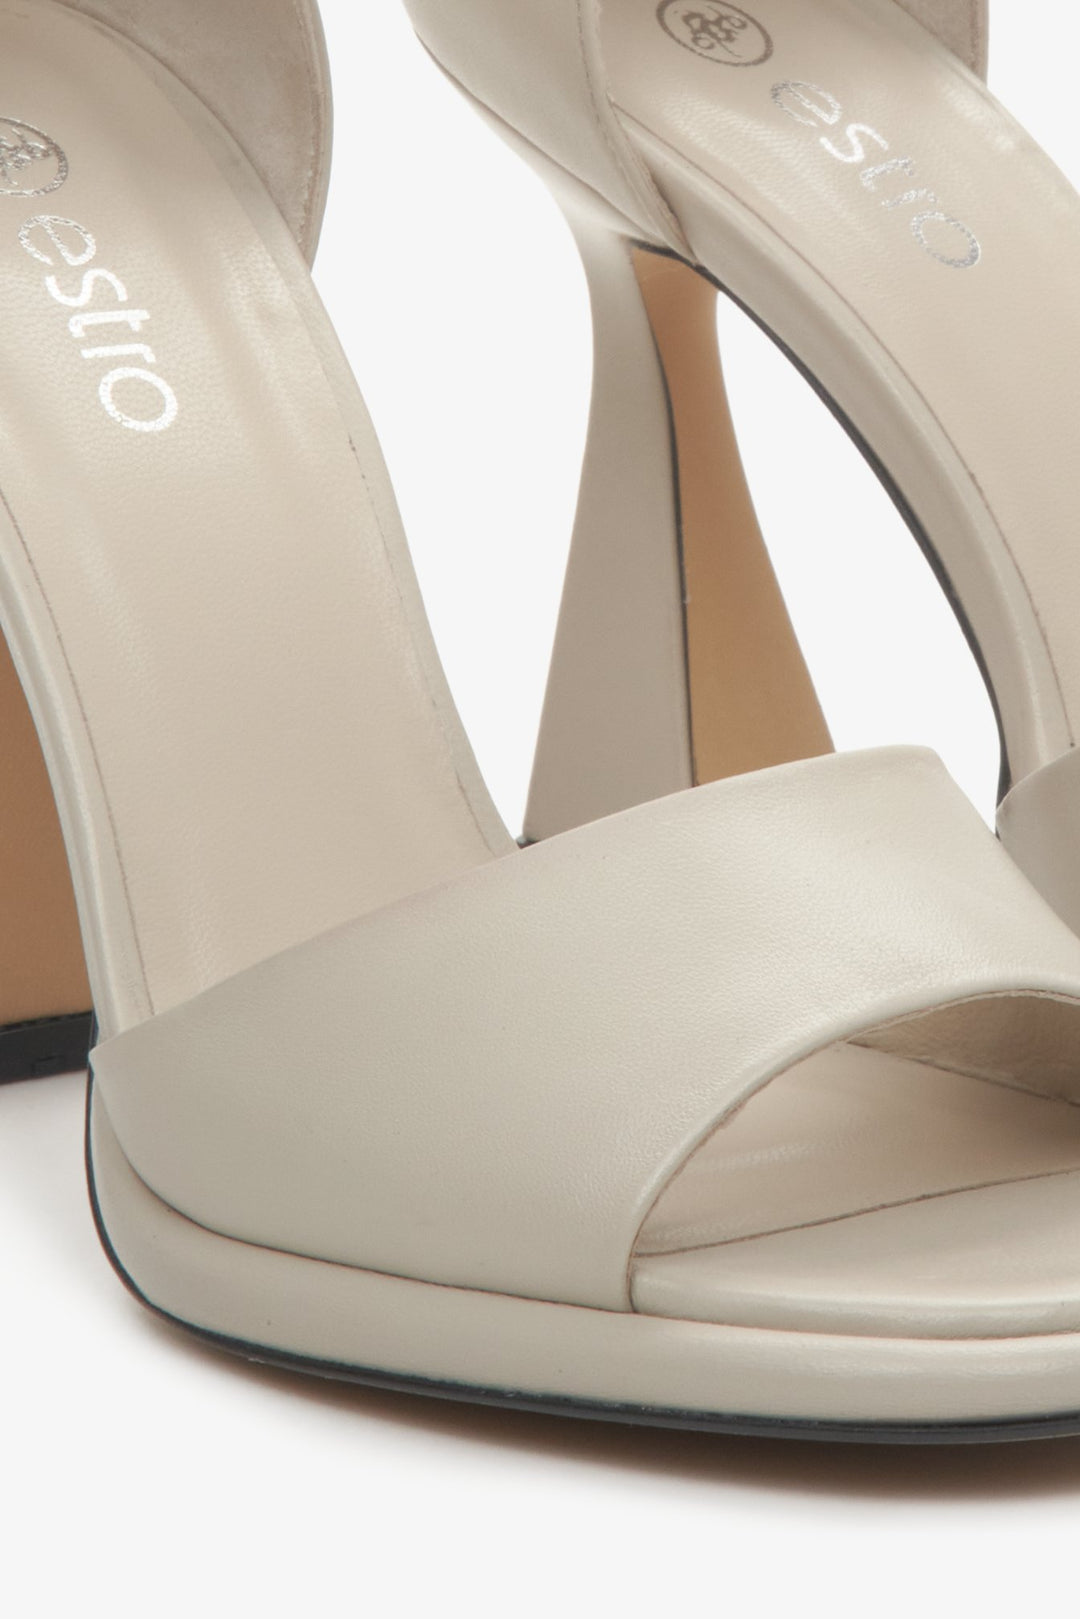 Women's sandals in beige: made of leather, on a stiletto heel, fastened at the ankle. Close-up of the details.